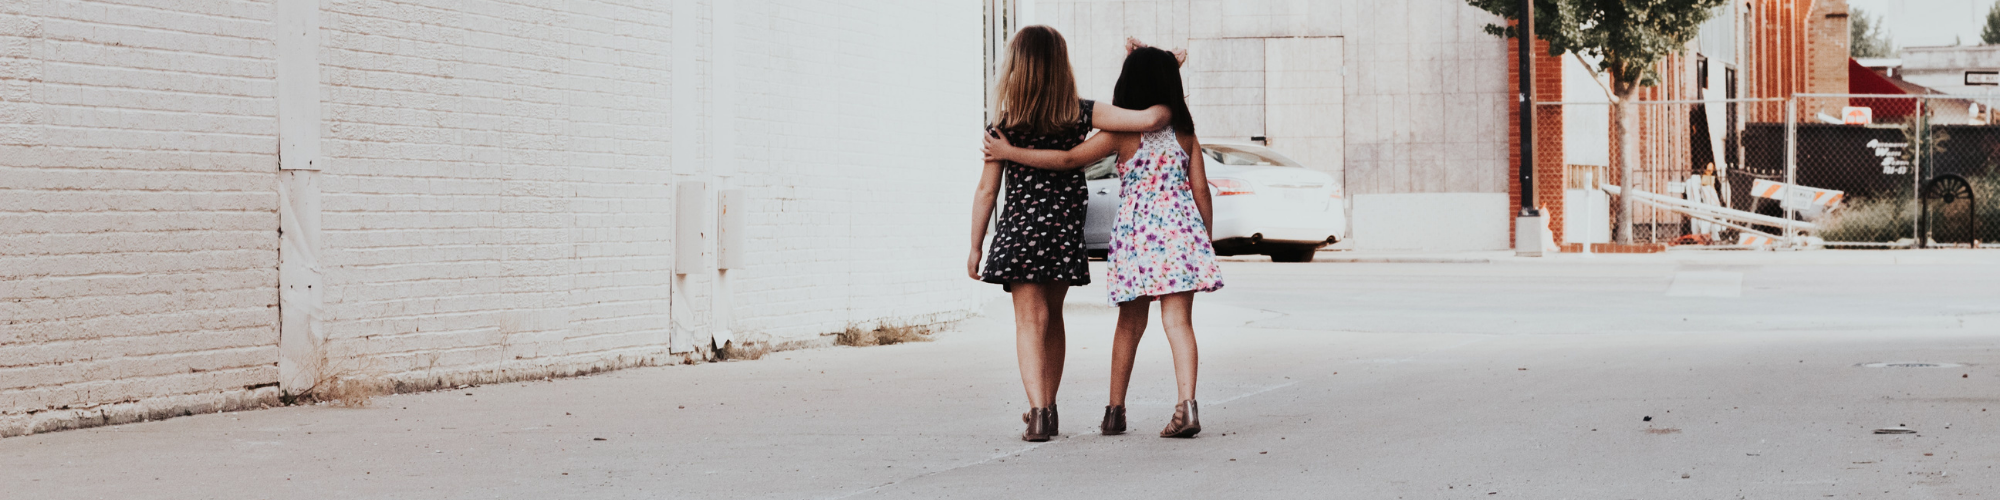 Pictured two little girls, both wearing dresses and flat shoes walking away from the camera with their arms over each others shoulders